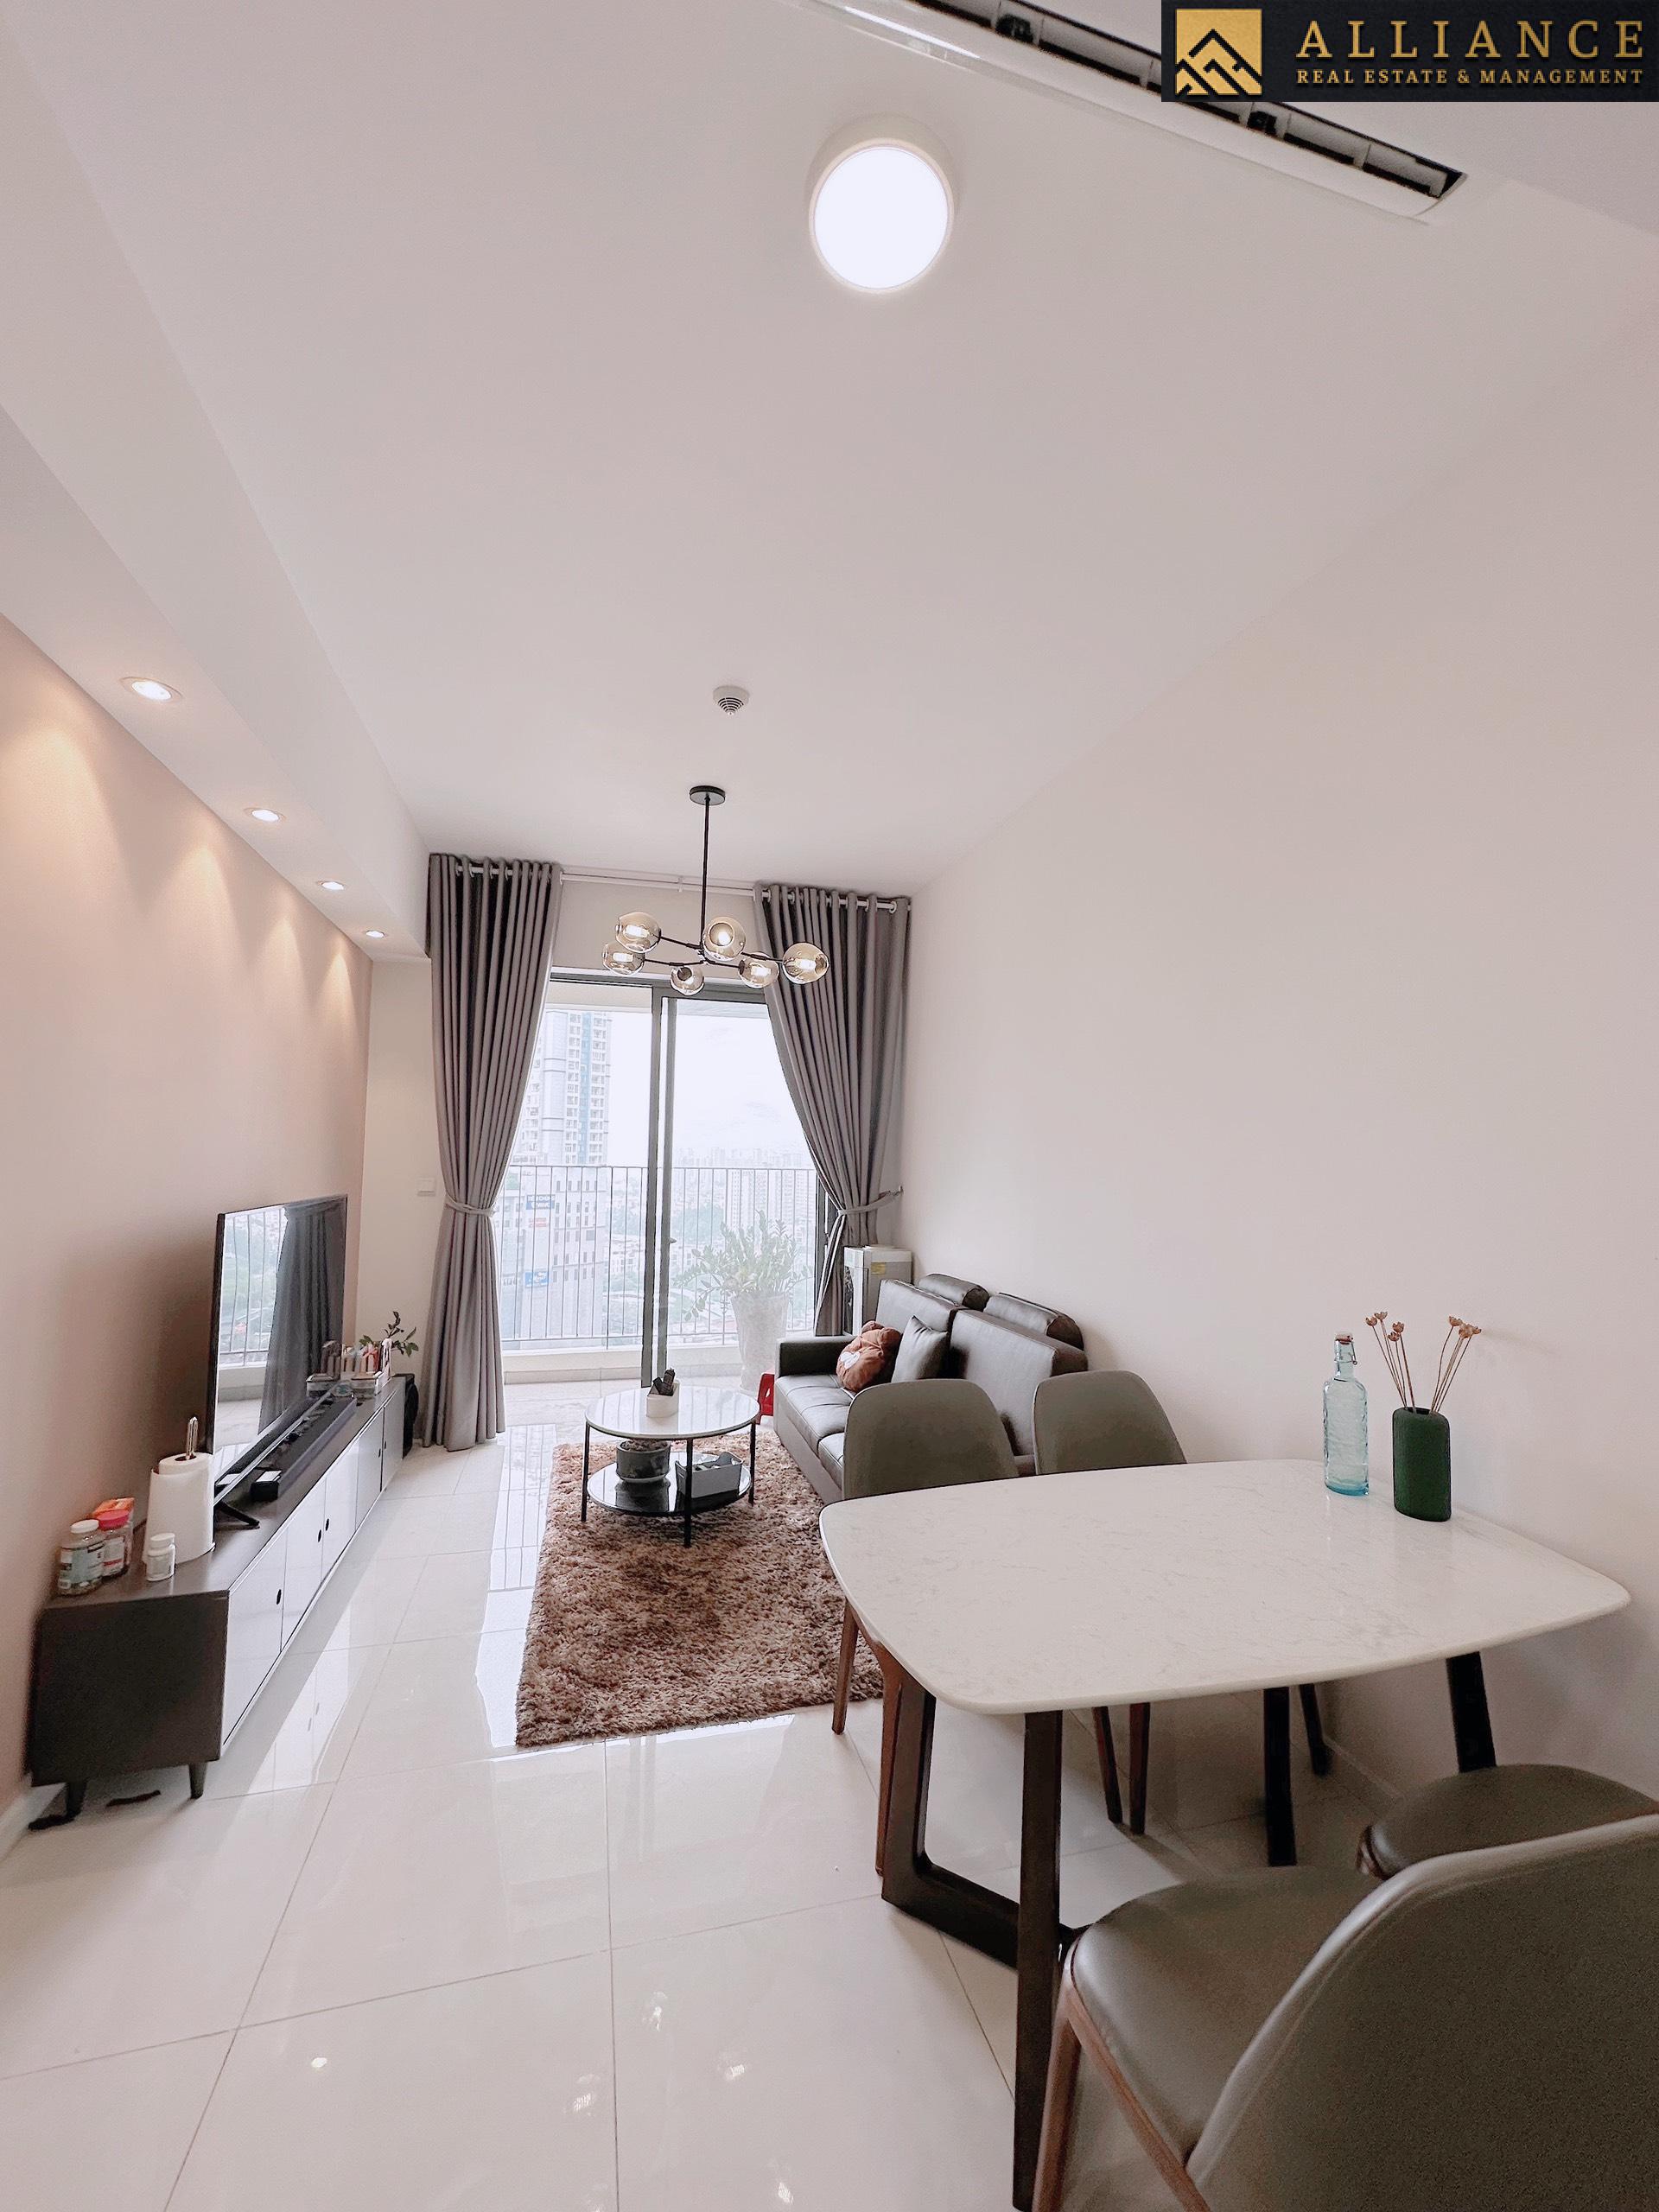 2 Bedroom Apartment (Masteri An Phu) for rent in Thao Dien Ward, Thu Duc City, HCM City